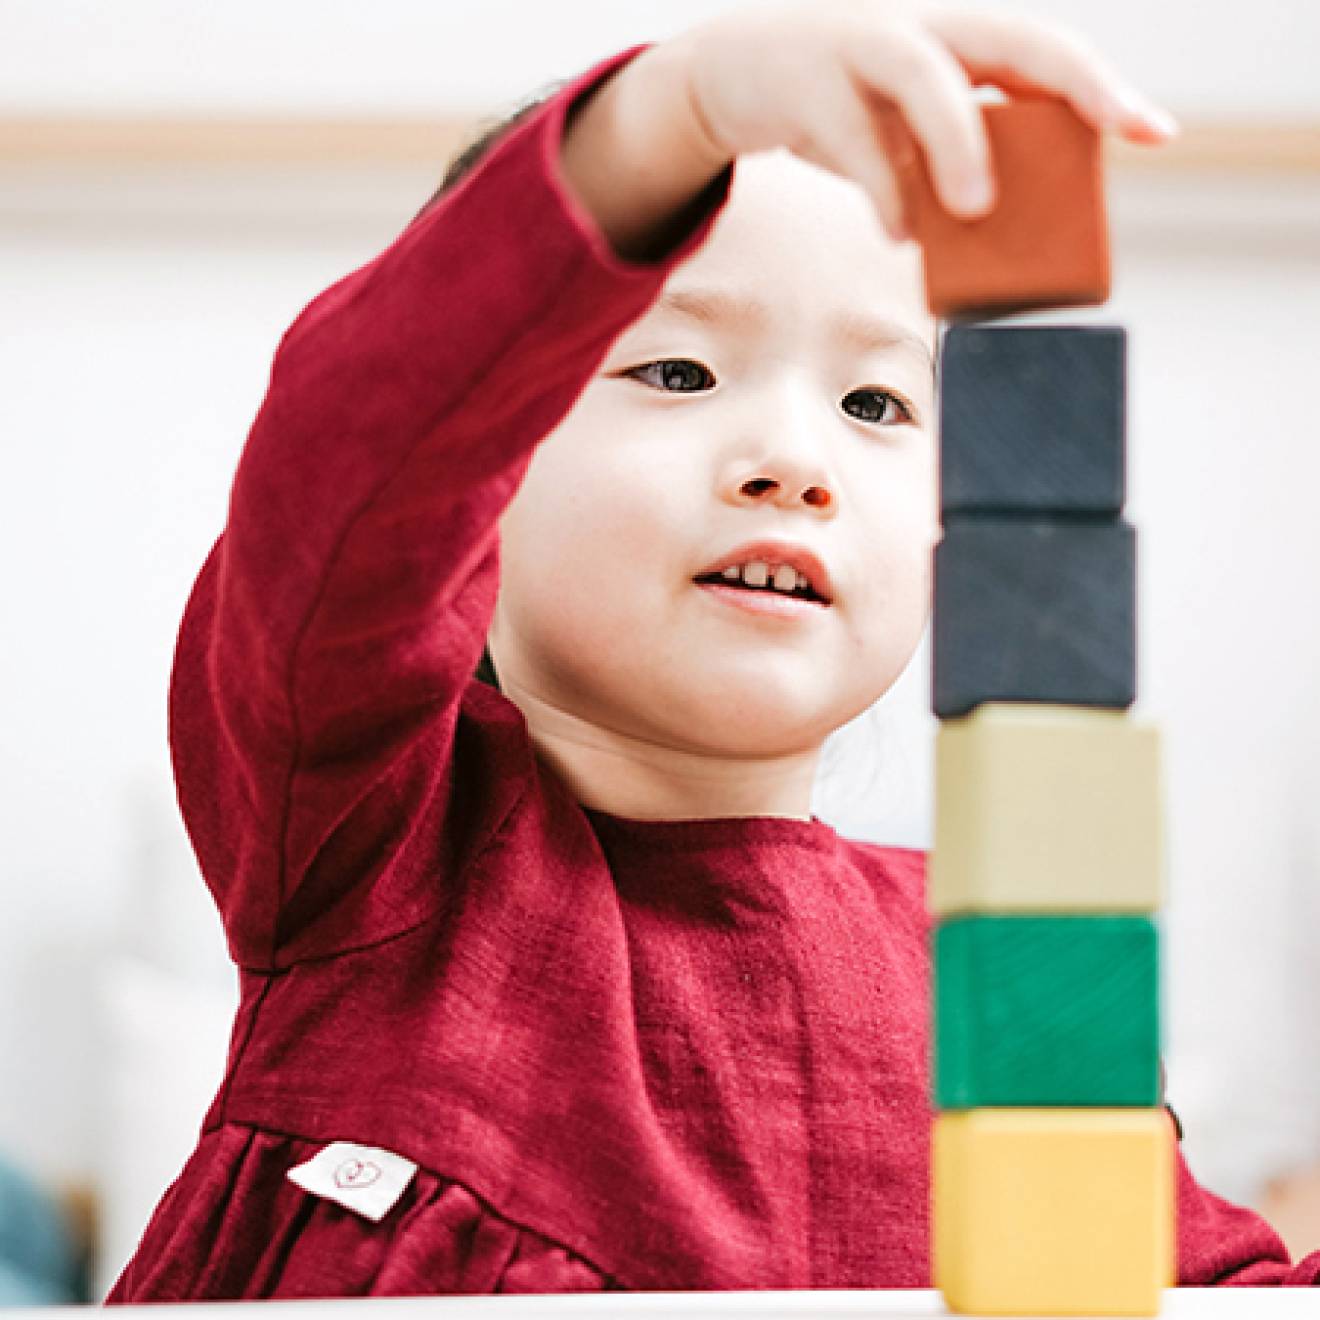 Young child playing with blocks in a classroom